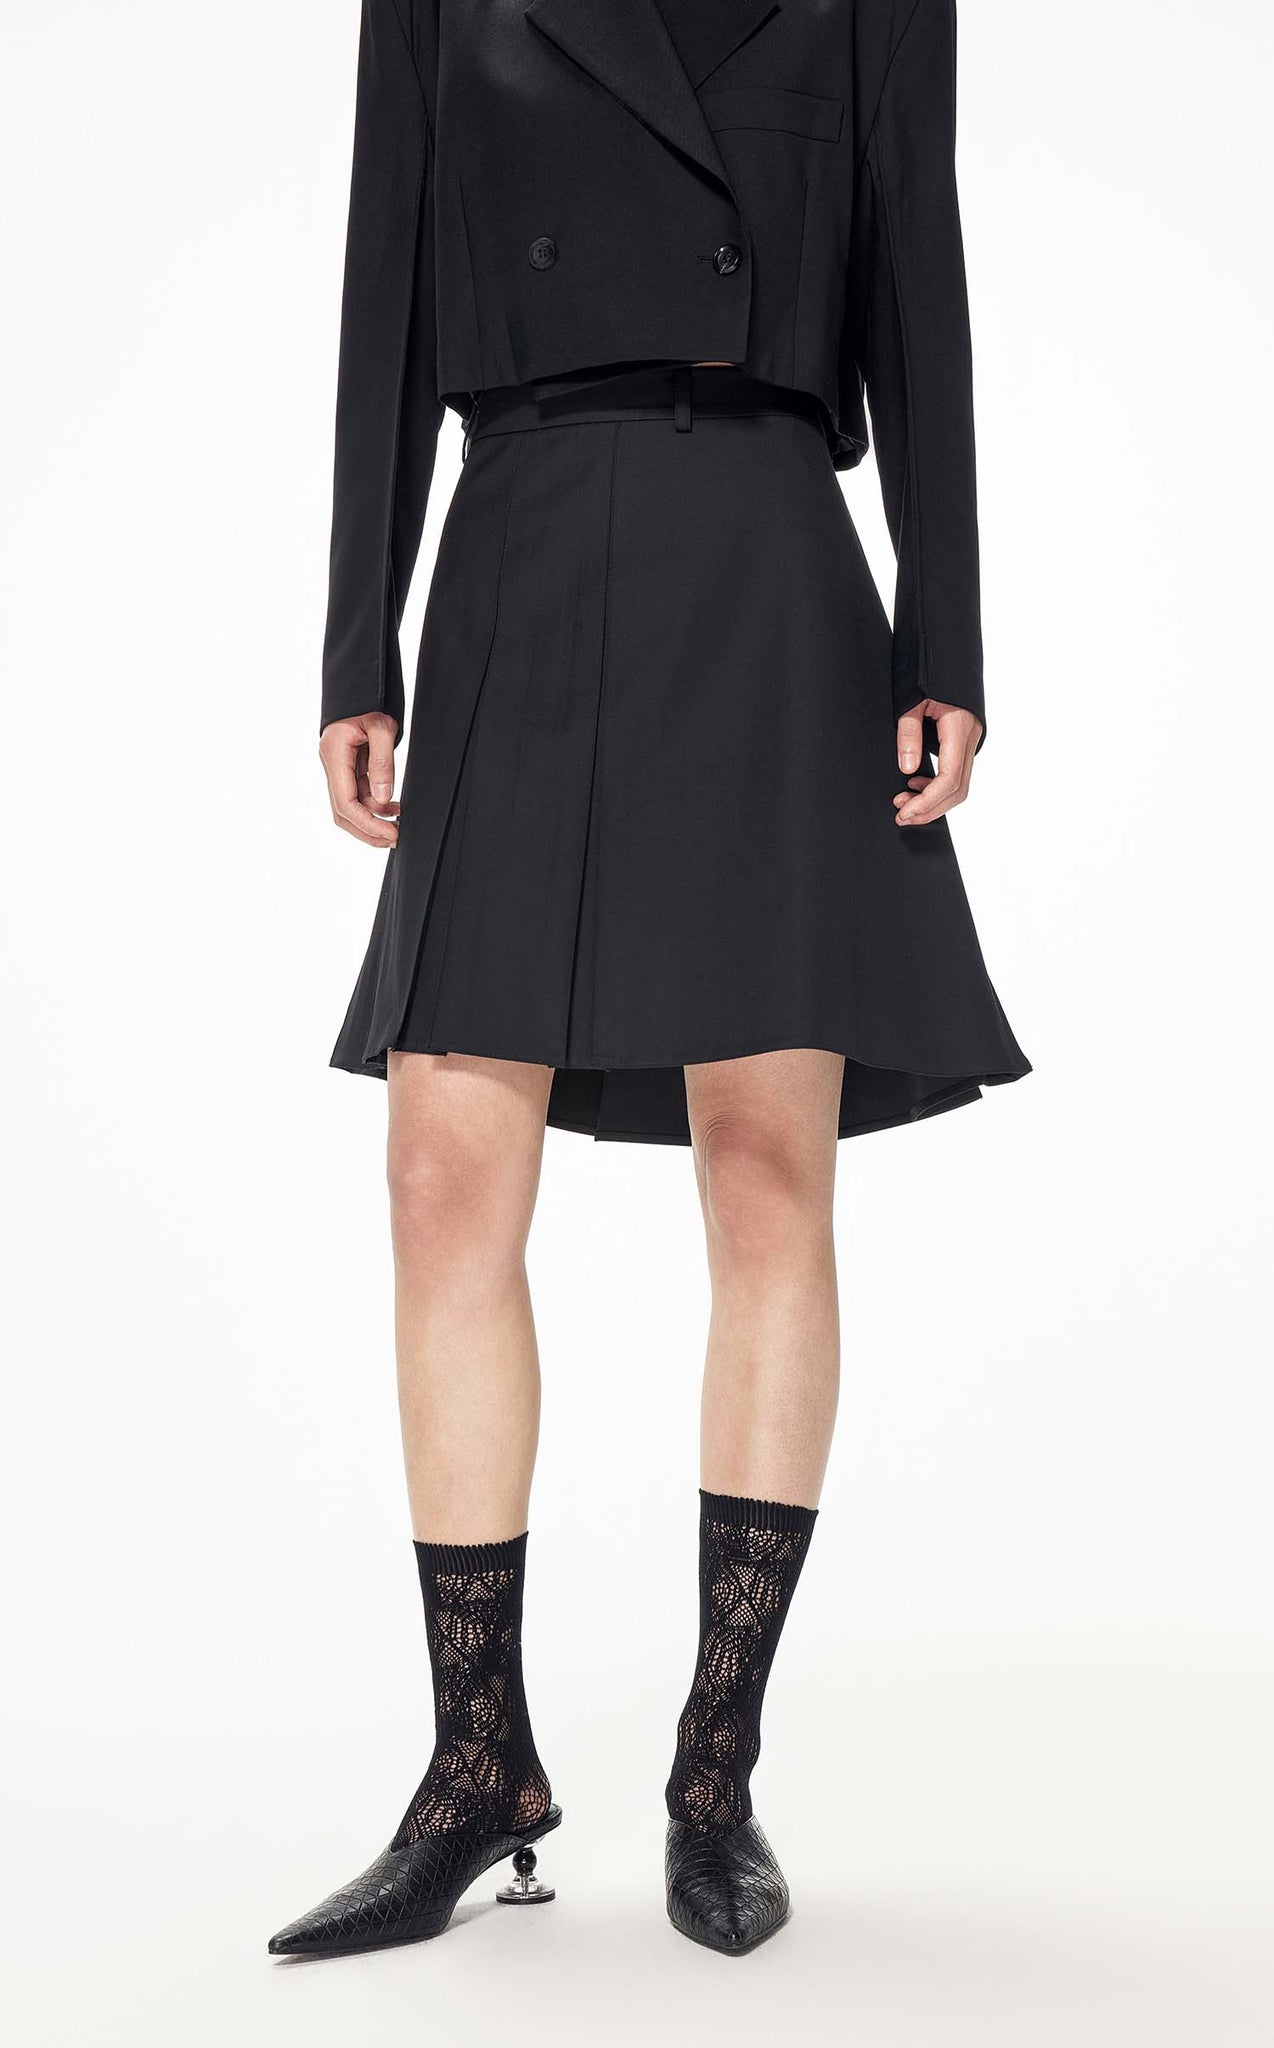 Skirts / JNBY A-Line Pleated Skirt (22% Sheep Wool)